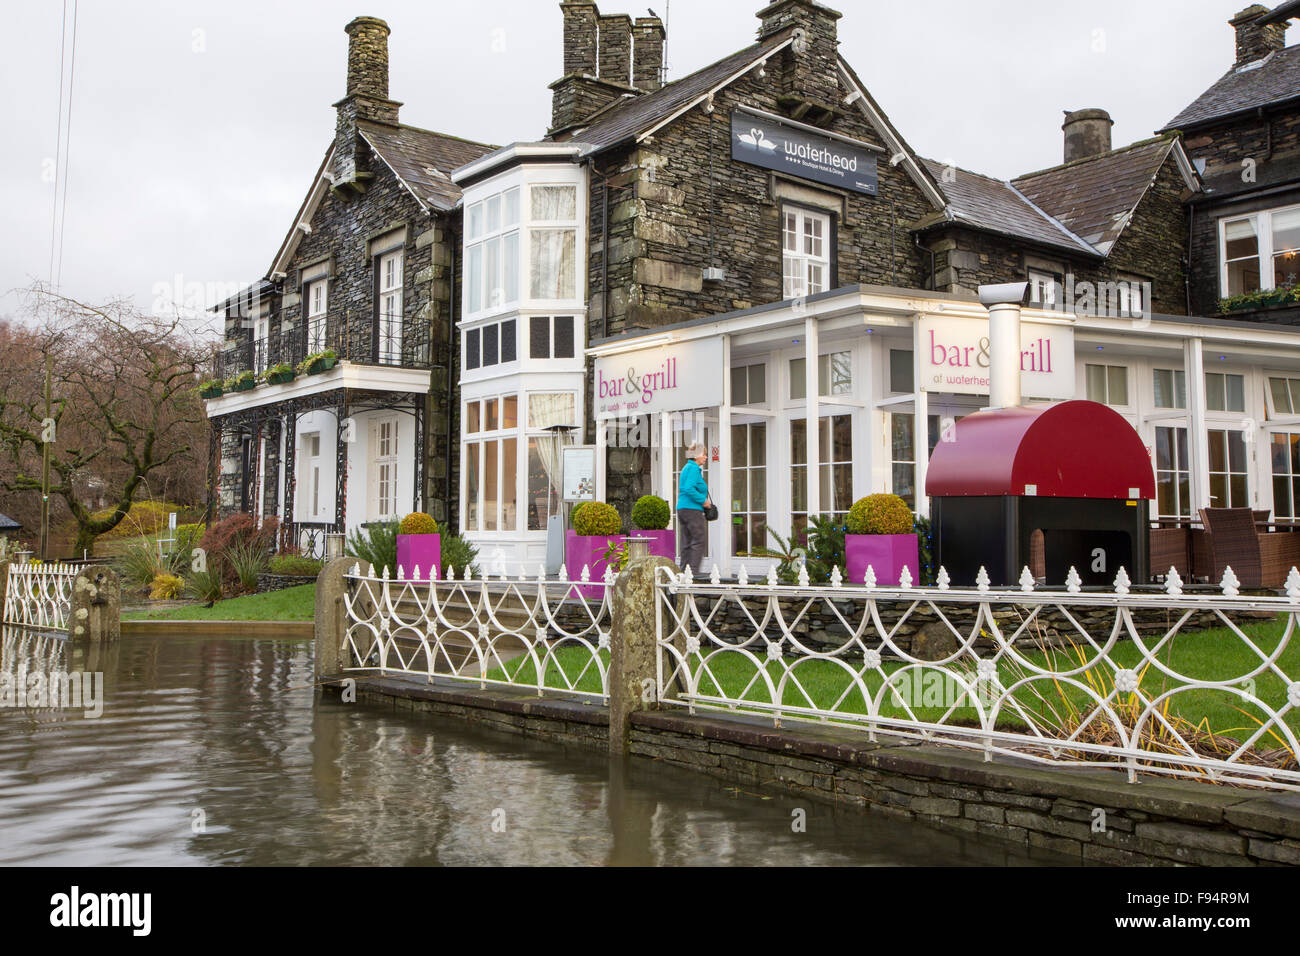 Waterhead in Ambleside submerged by flood water after Lake Windermere burst its banks in Ambleside in the Lake District on Sunday 6th December 2015, after torrential rain from storm Desmond. Stock Photo